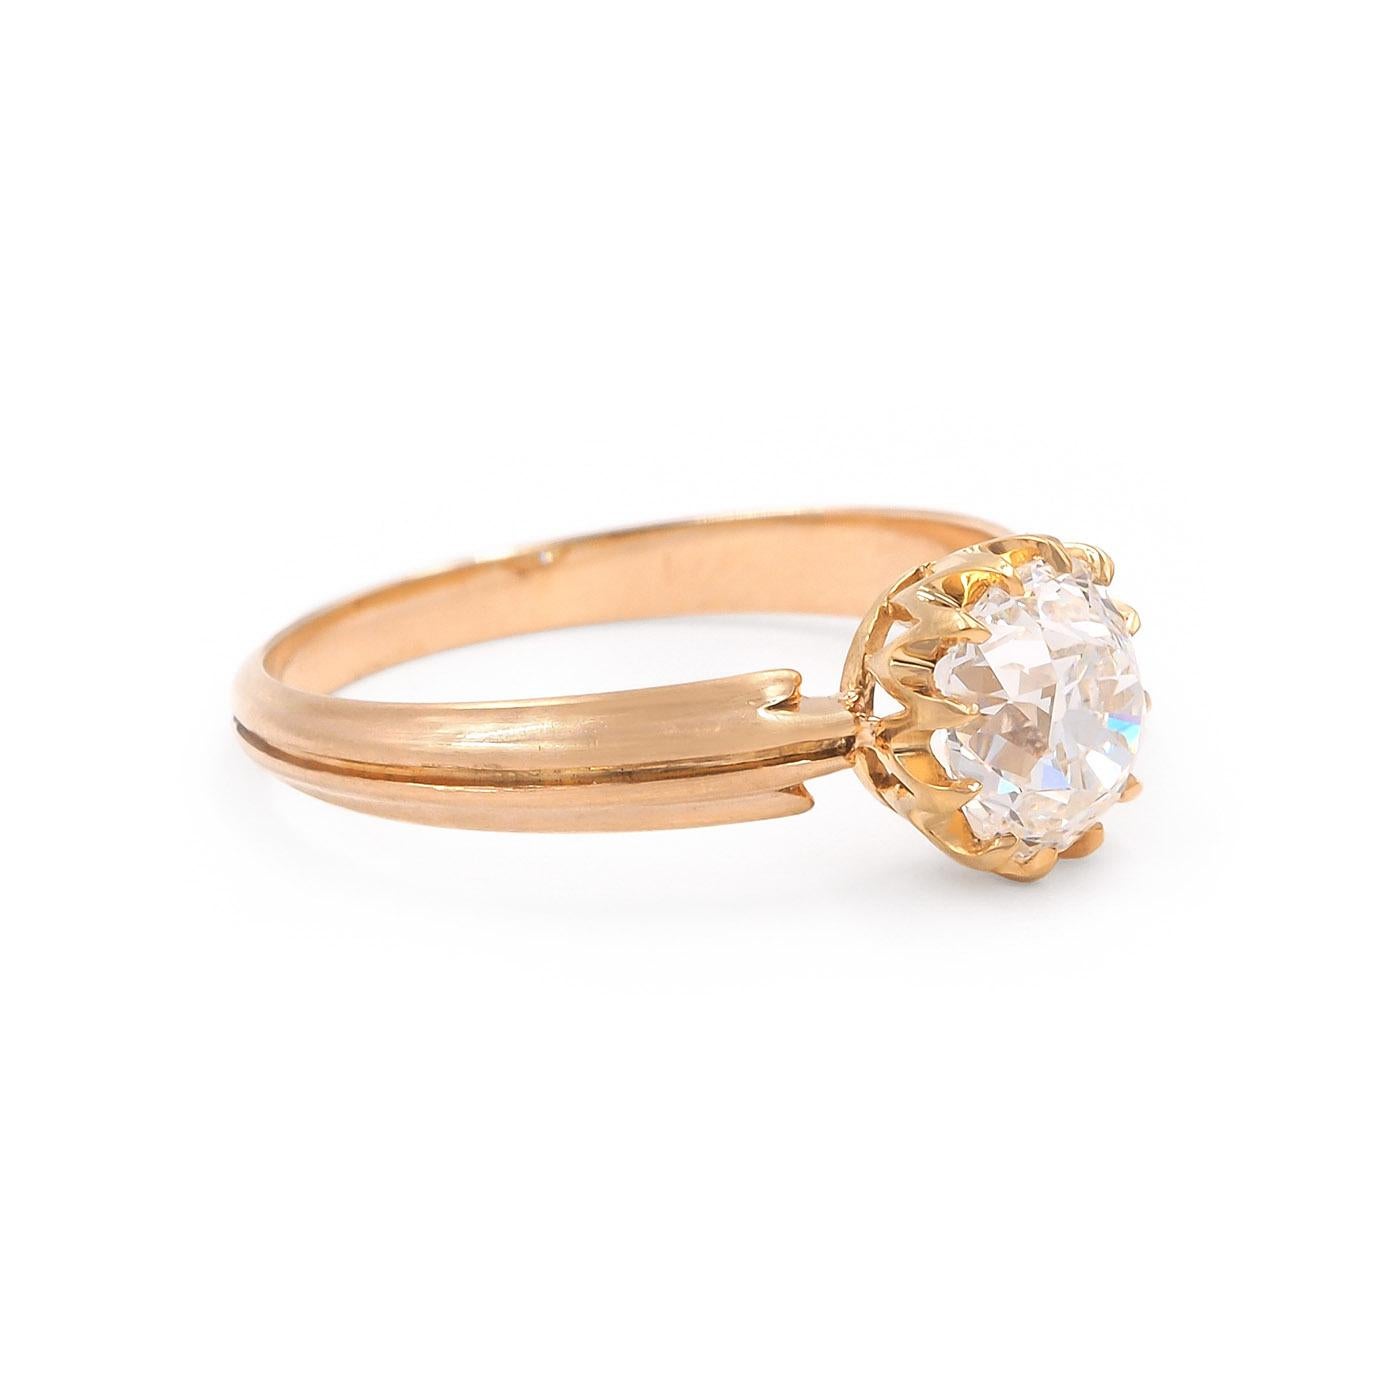 Victorian era 1.54 Carat Old Mine Cut Diamond Solitaire Engagement Ring composed of 18k yellow gold. The 1.54 carat Old Mine Cut diamond is GIA certified G color & VS1 clarity. Diamond is a slightly elongated cushion-shape and is set in a